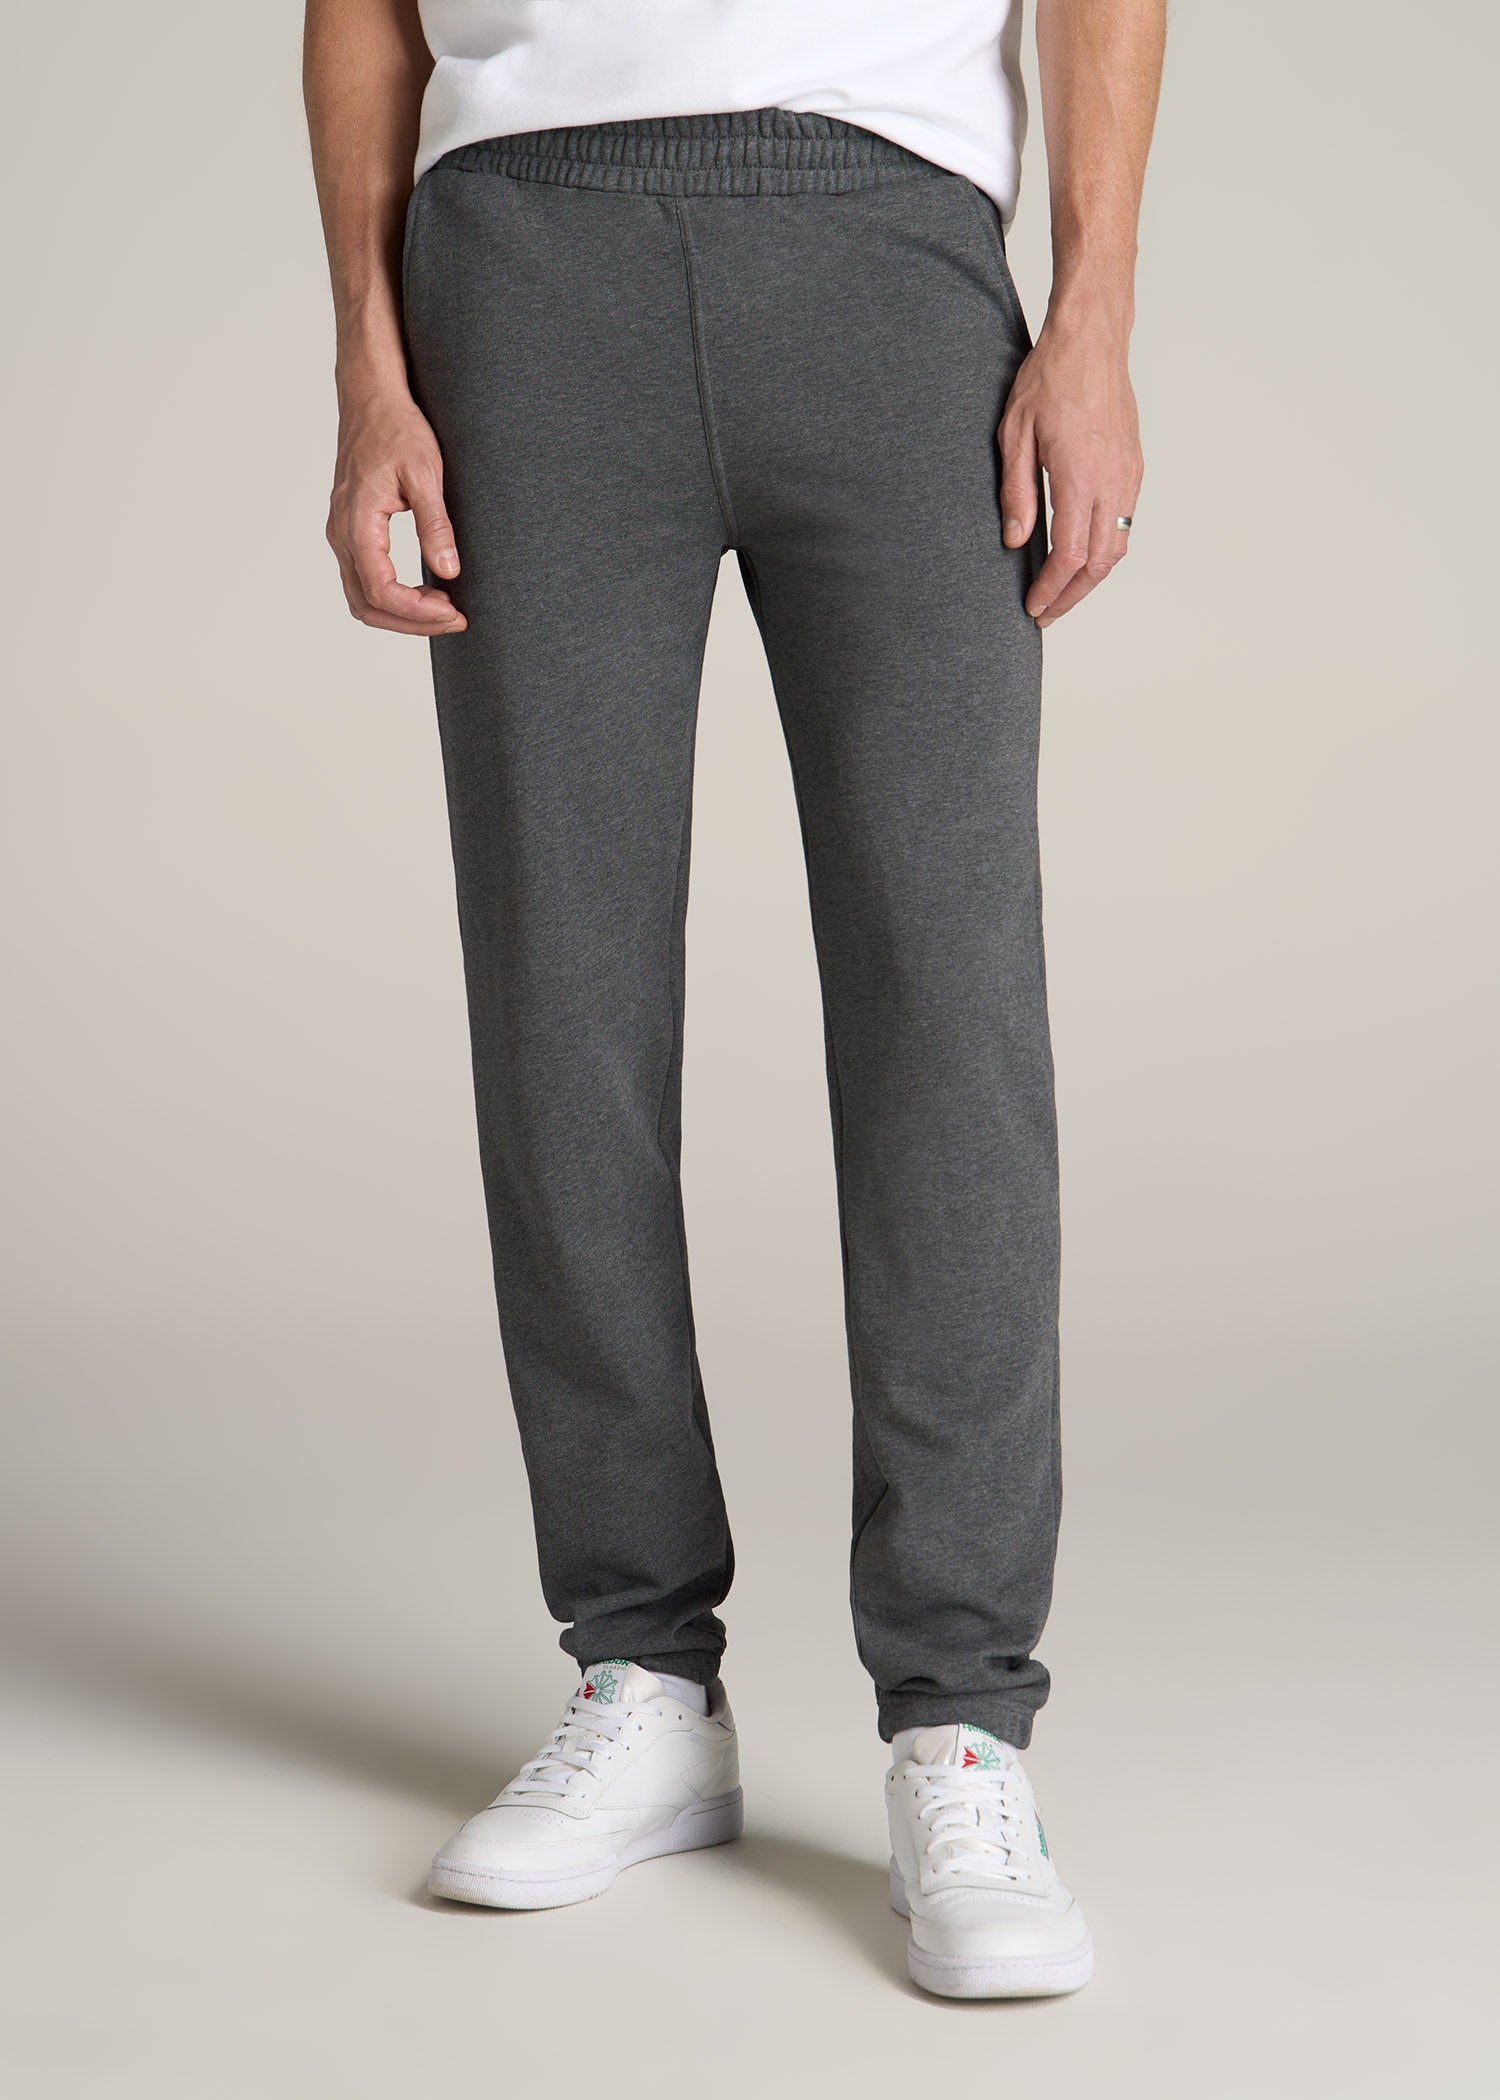 American-Tall-Men-Wearever-French-Terry-Sweatpants-Men-Charcoal-Mix-front